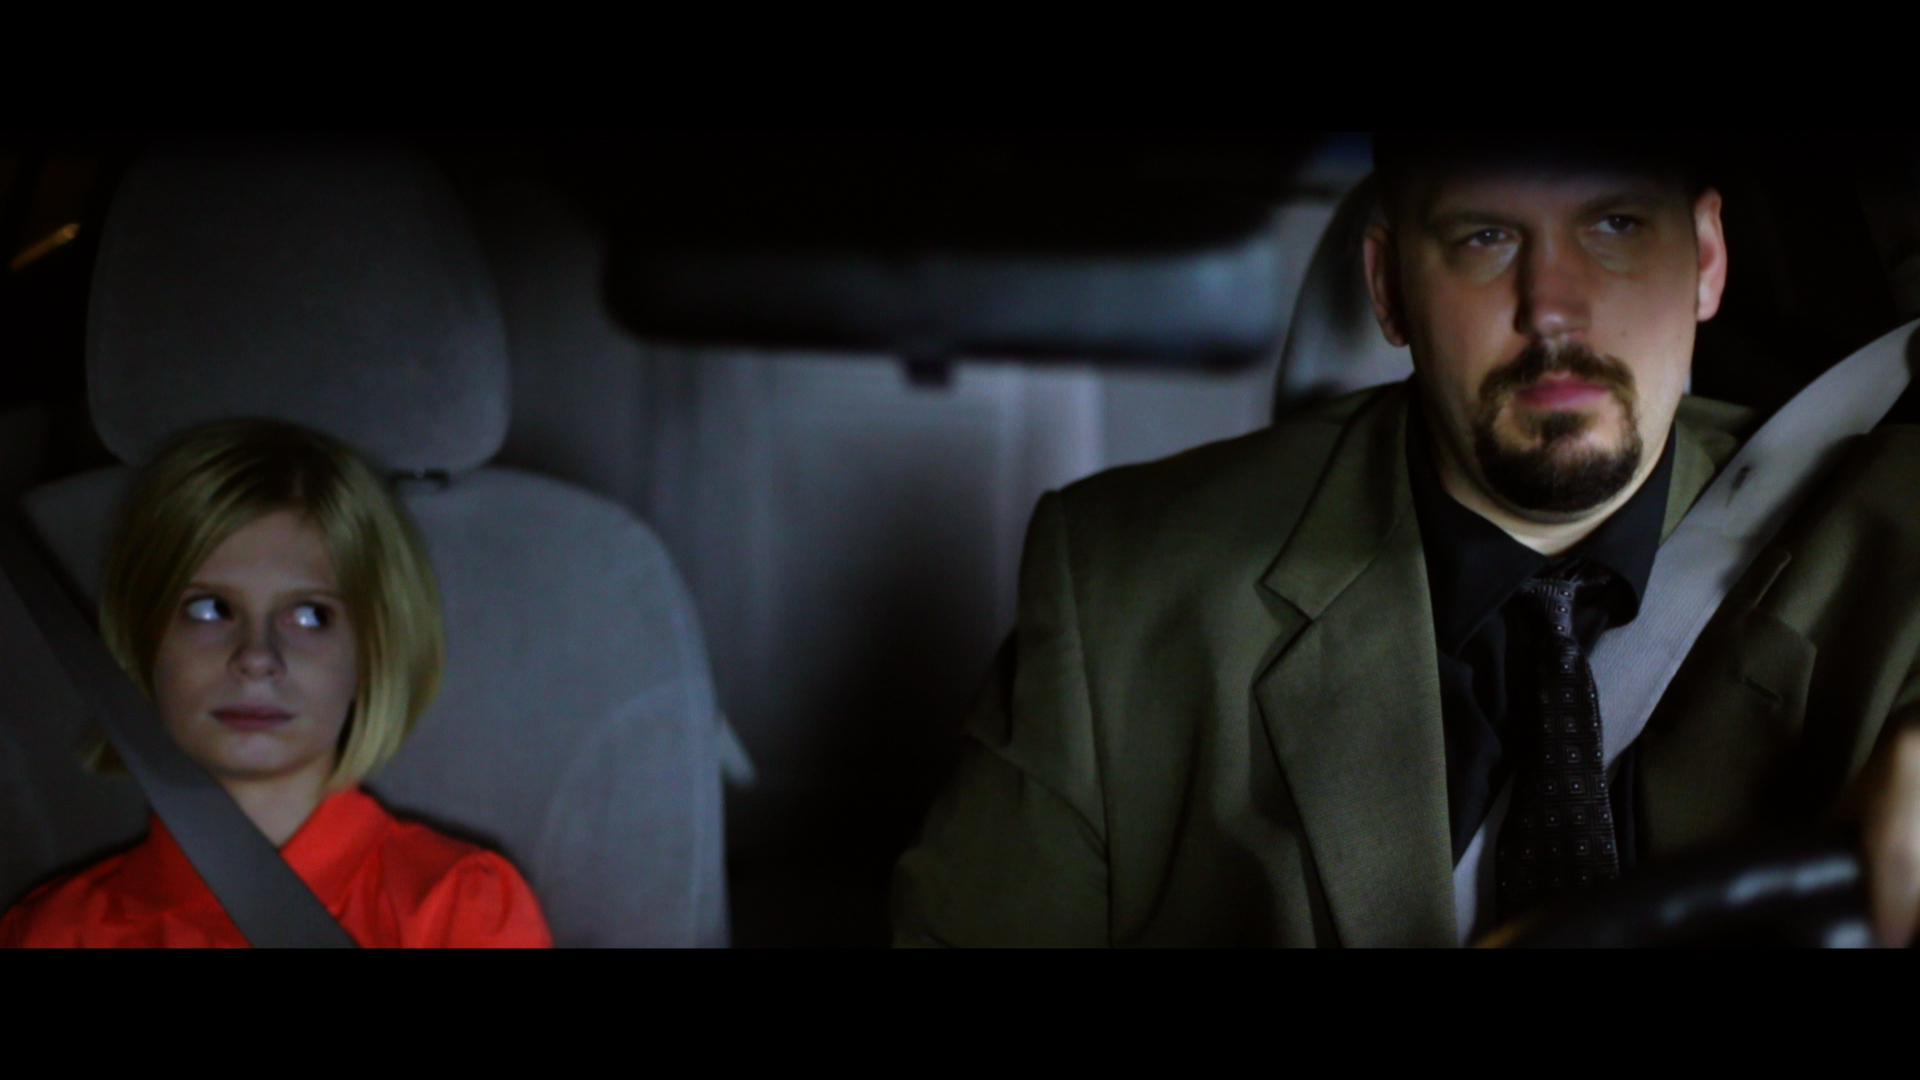 THE WATCHERS: REVELATION production still. Carissa Dallis and Russell Williams